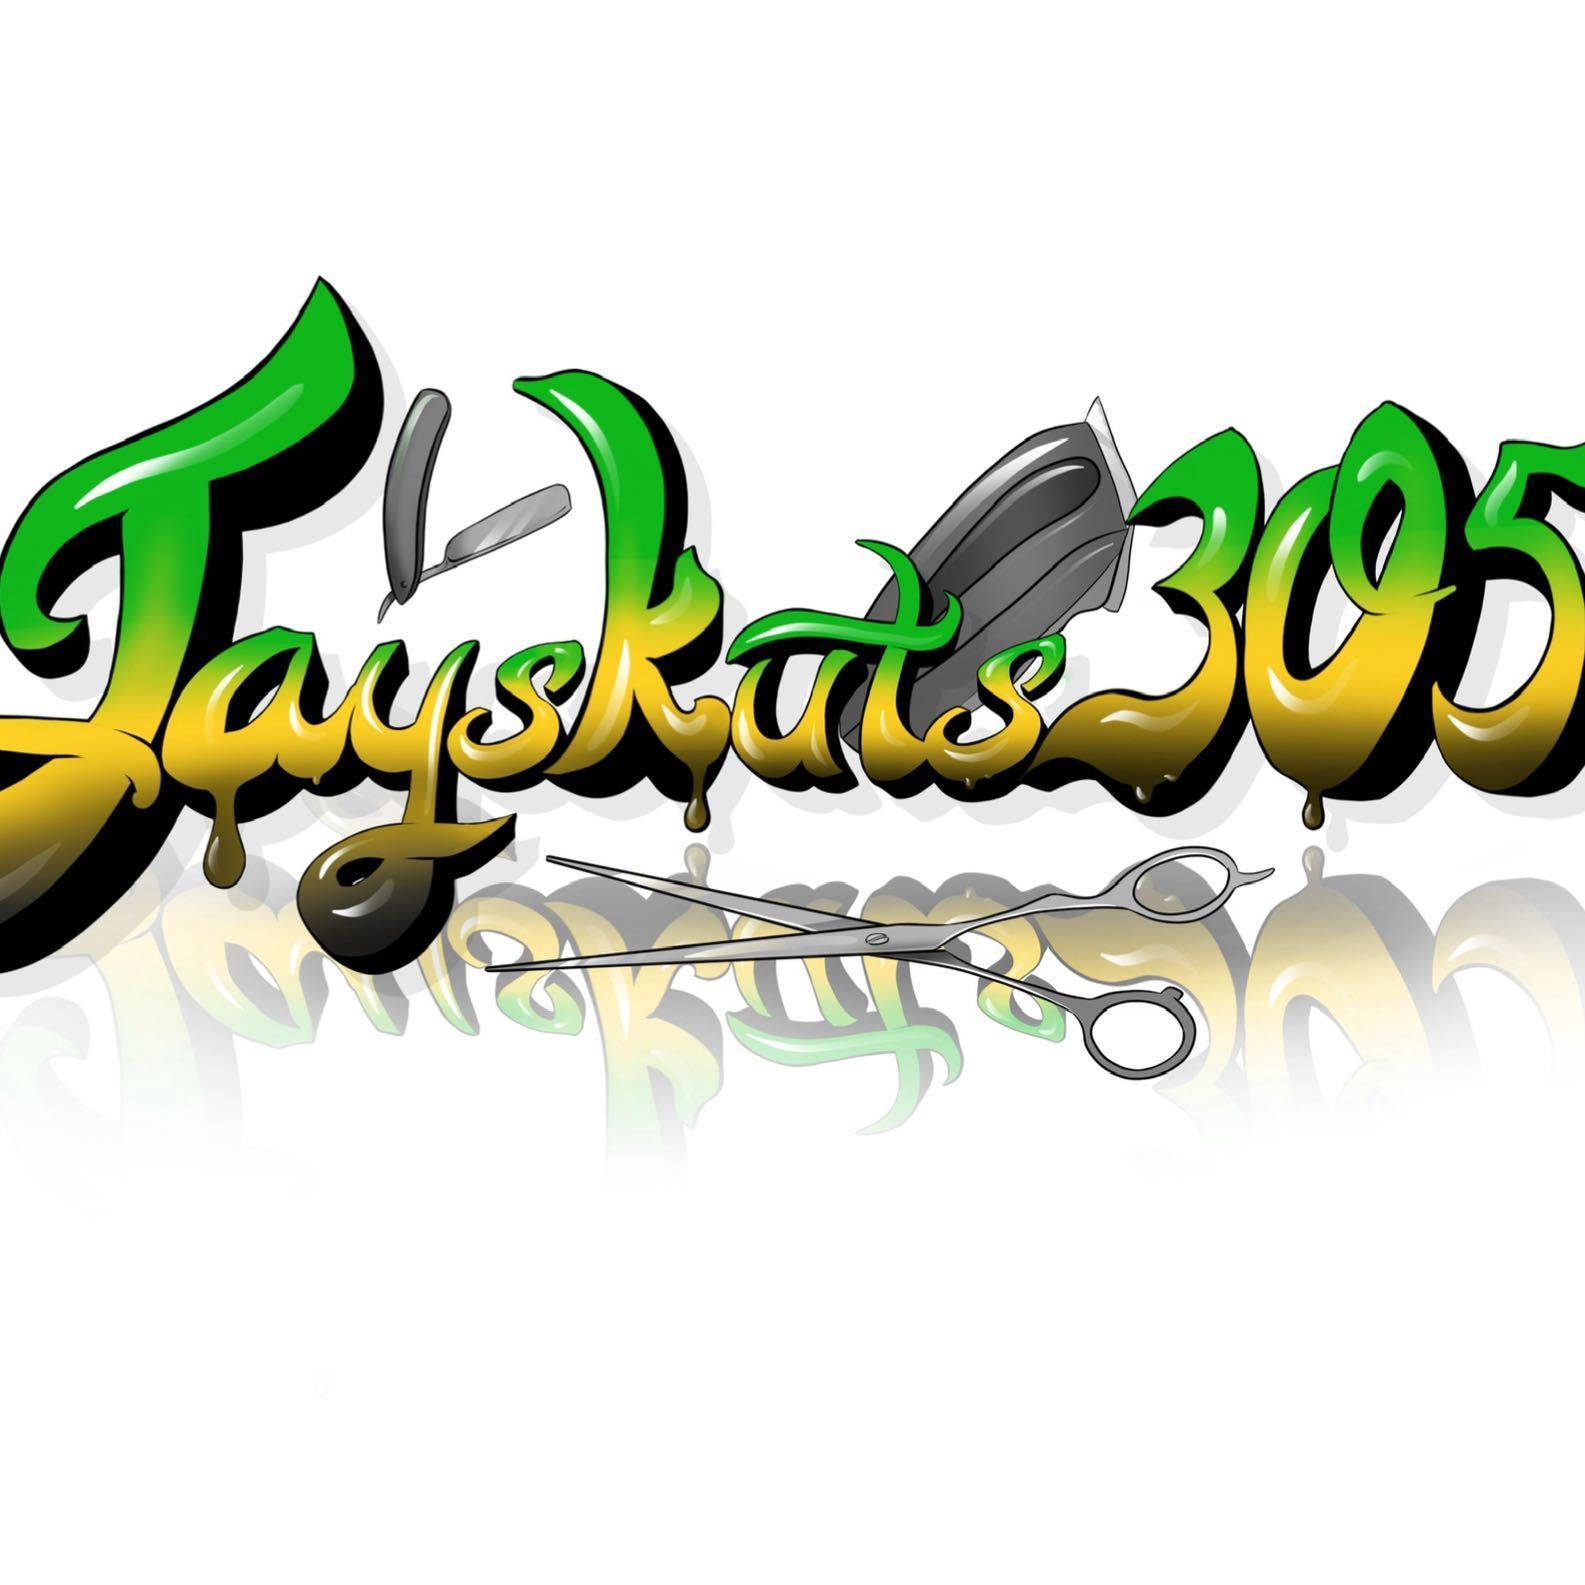 Jay’s Kuts 305, 1038 Clearlake Rd, Cocoa, 32922